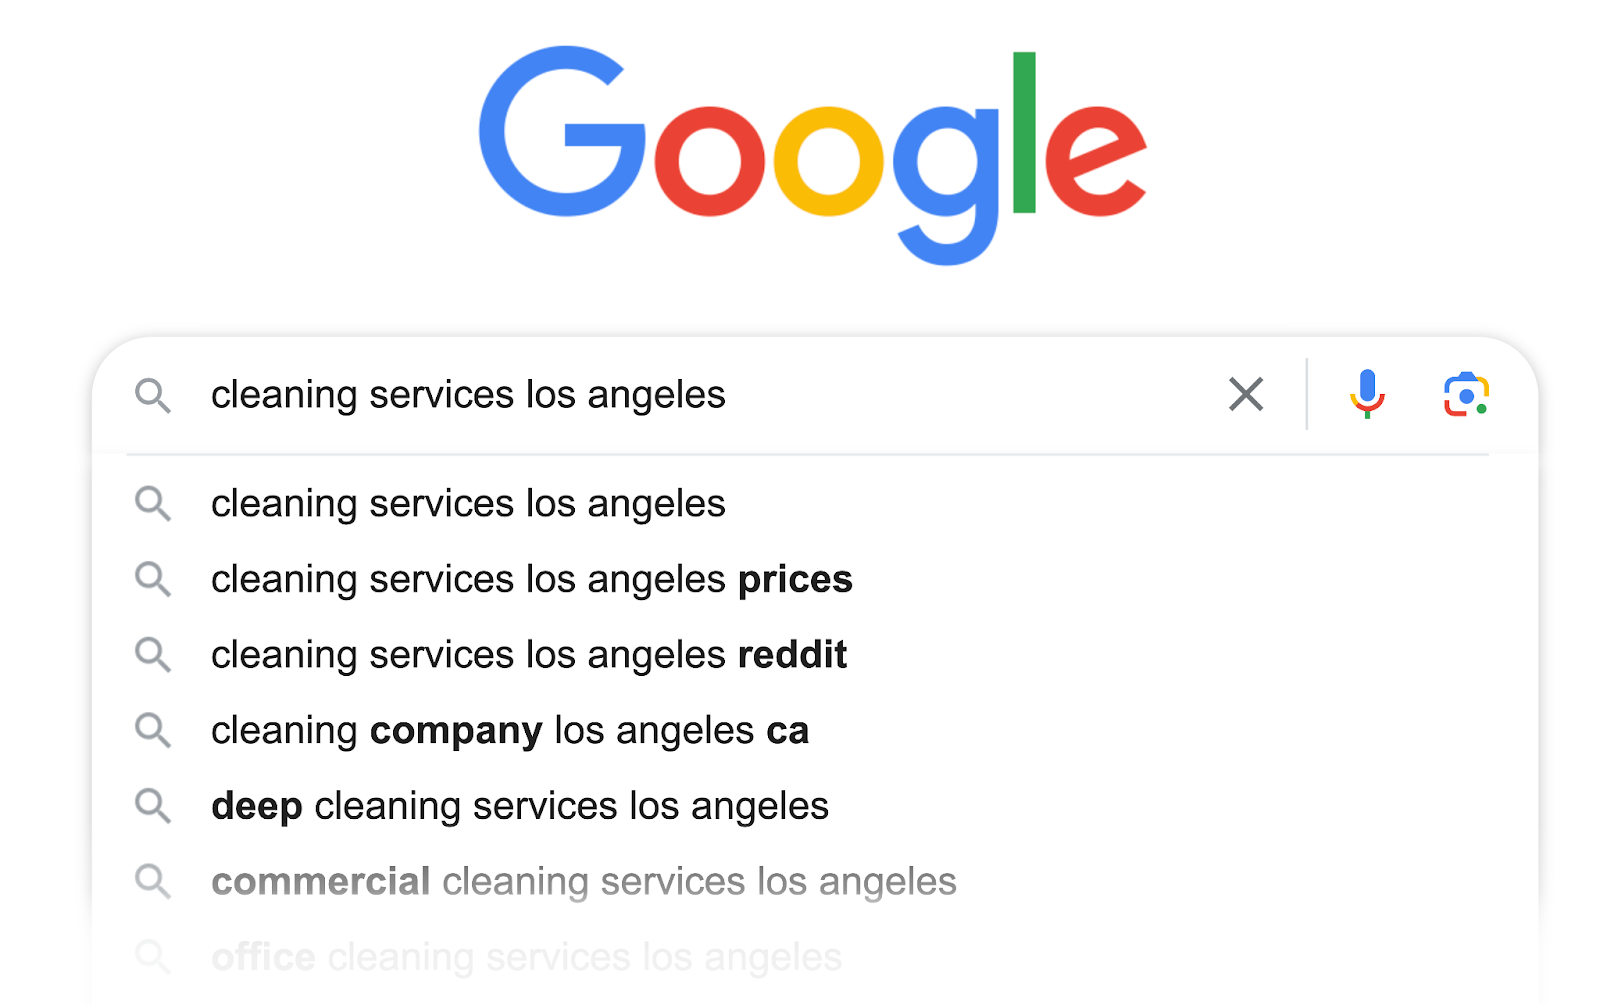 Google Autocomplete suggestions for “cleaning services los angeles”